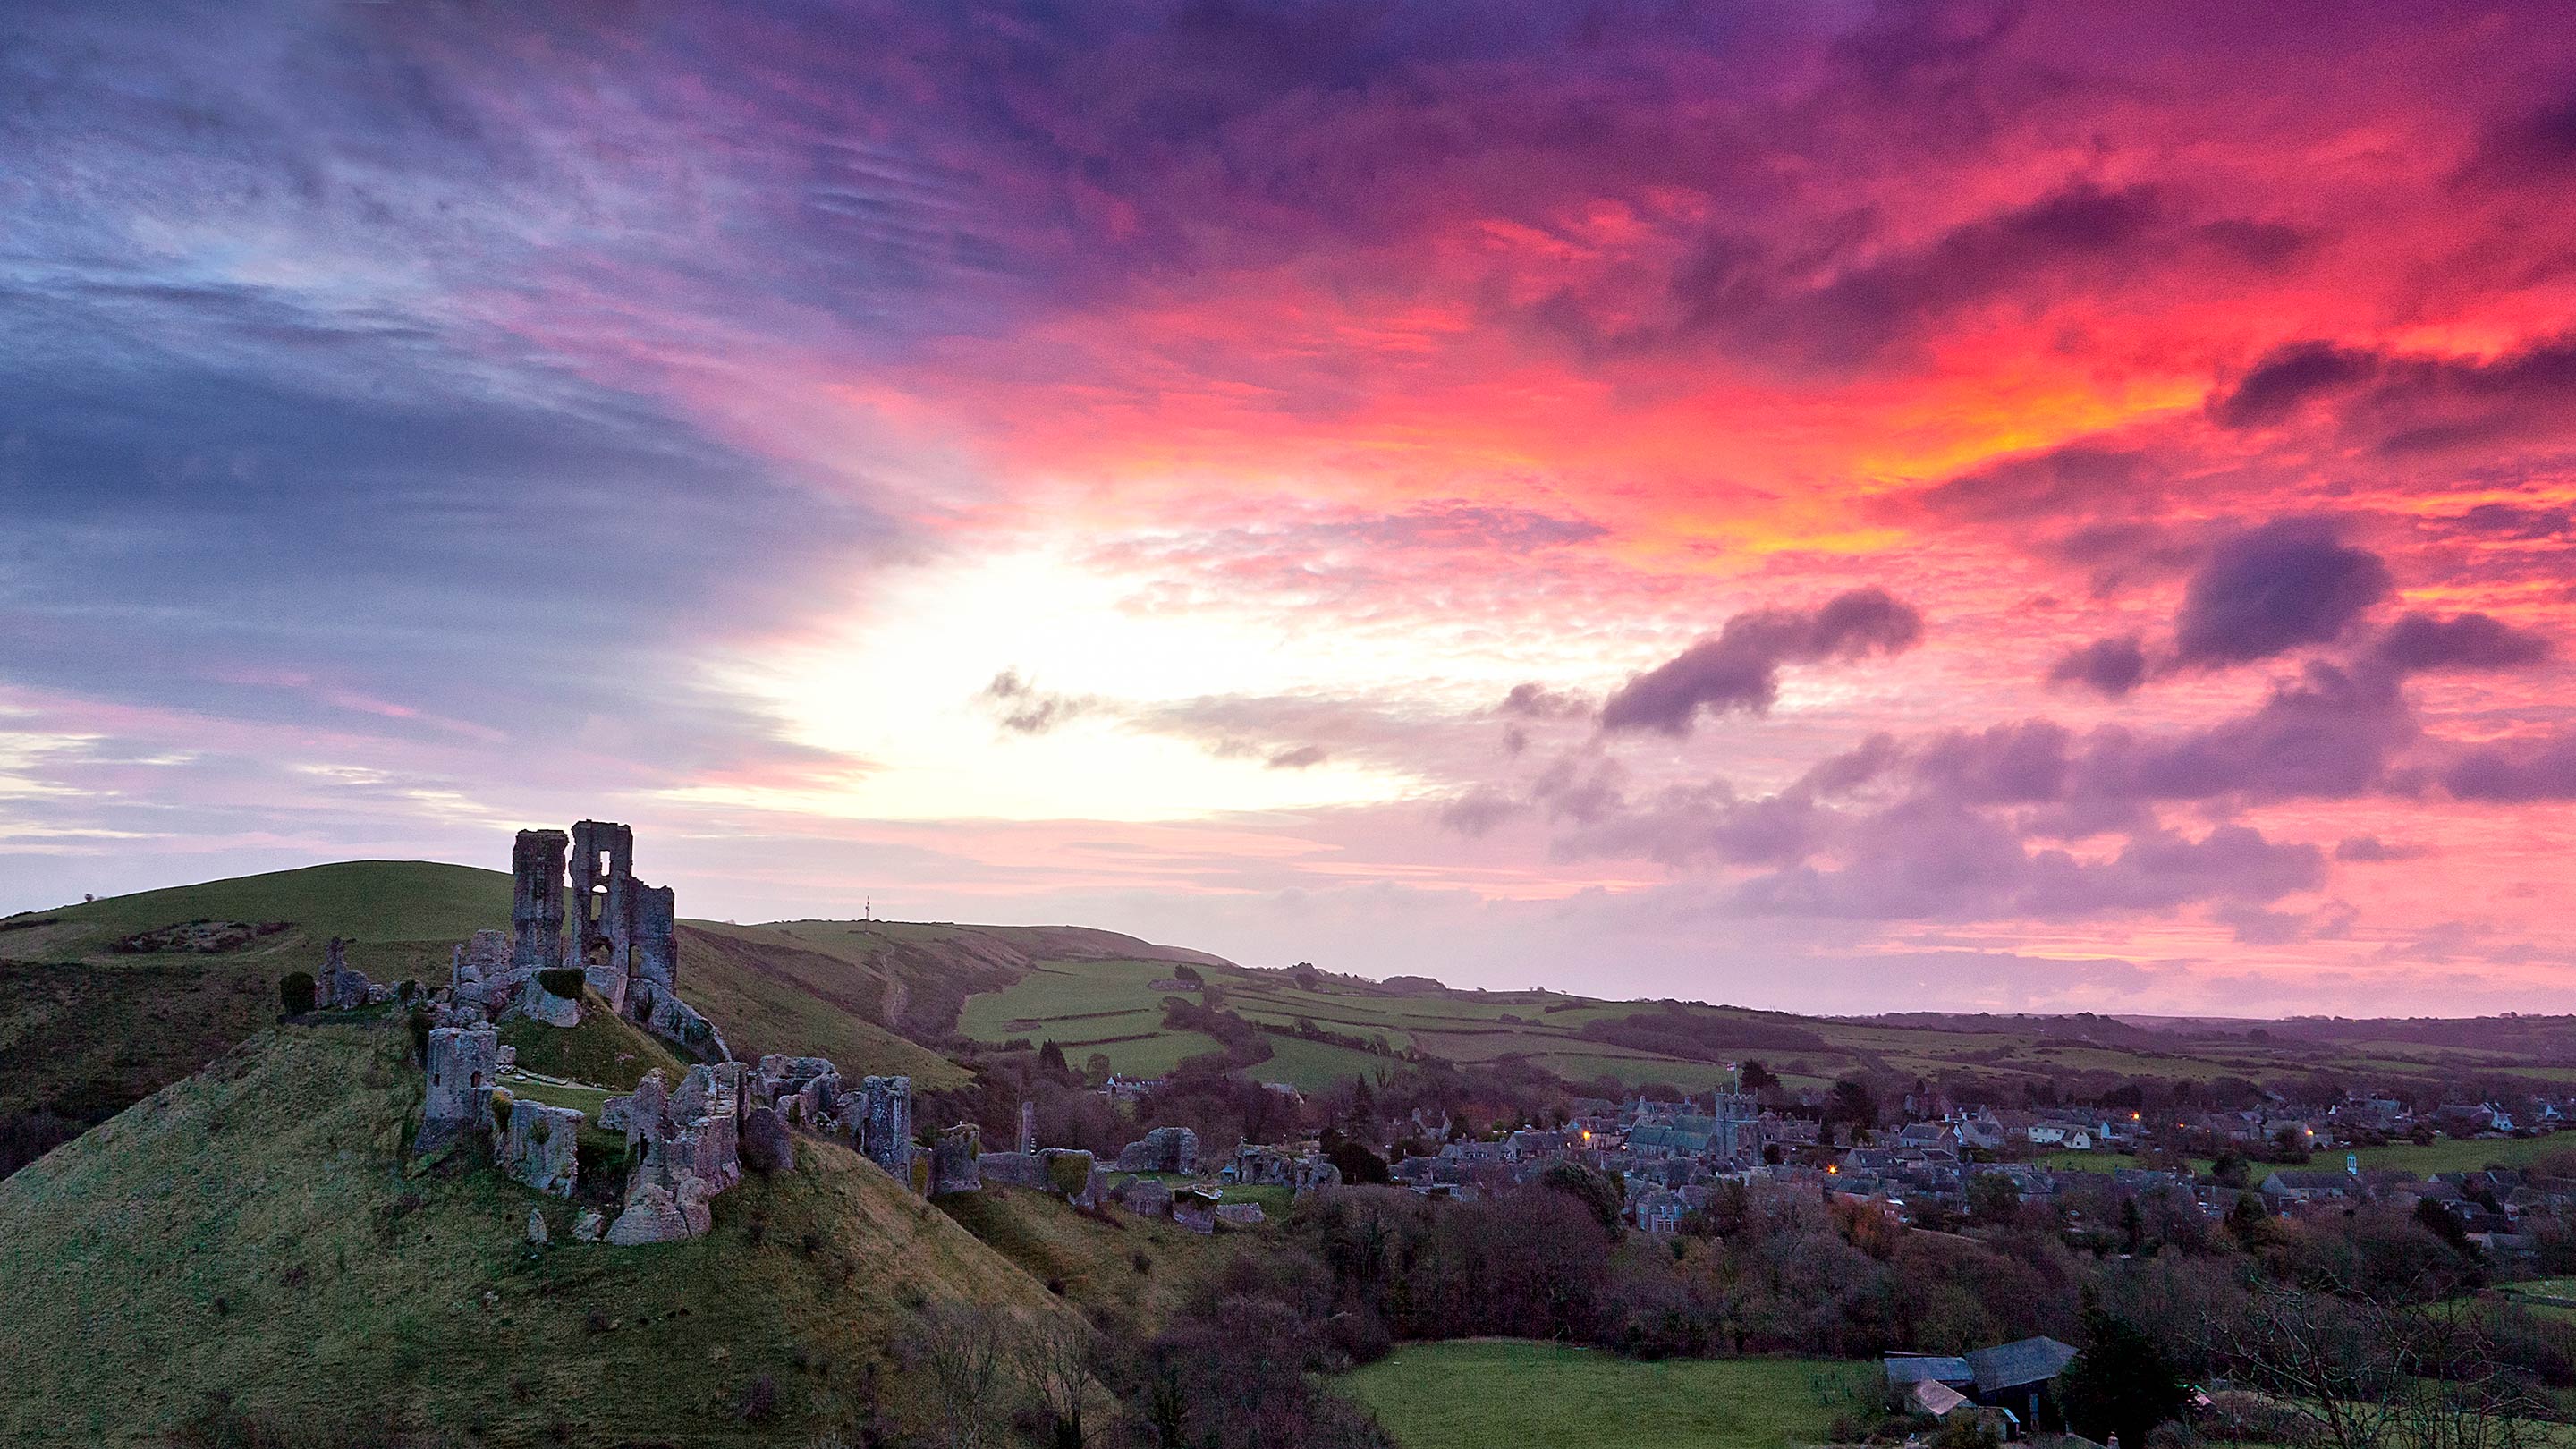 Fine Art Limited Edition Print Wall Corporate Decoration Interior Design Paul Reiffer Photographer Photography High End Landscape Cityscape Buy King Of The Castle Corfe